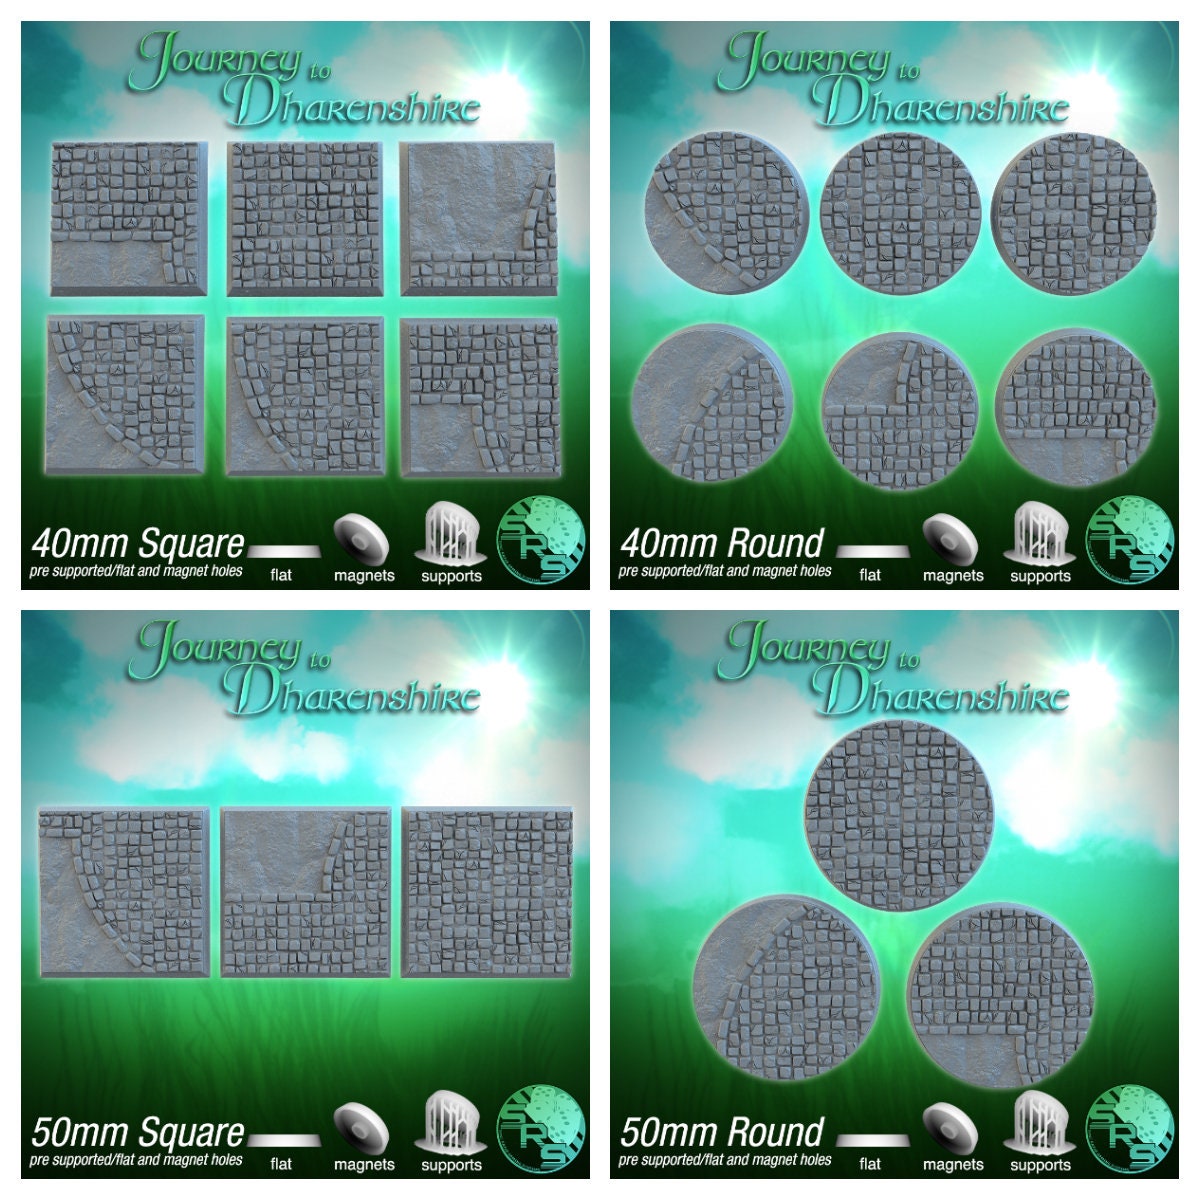 Cobblestone | Resin Bases | Square and Round | Sync Ratio Systems